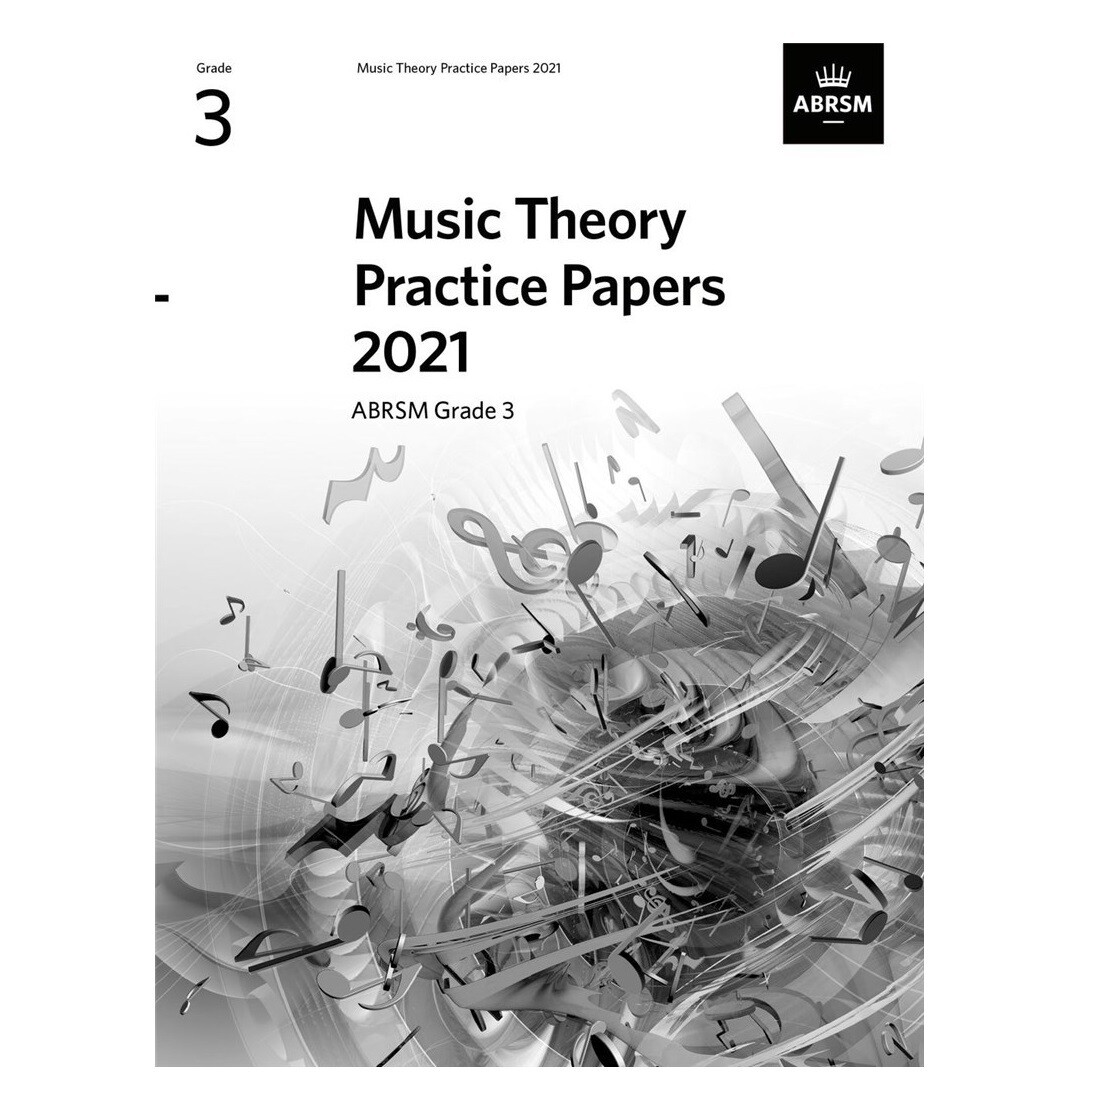 ABRSM Music Theory Practice Papers 2021: Grade 3